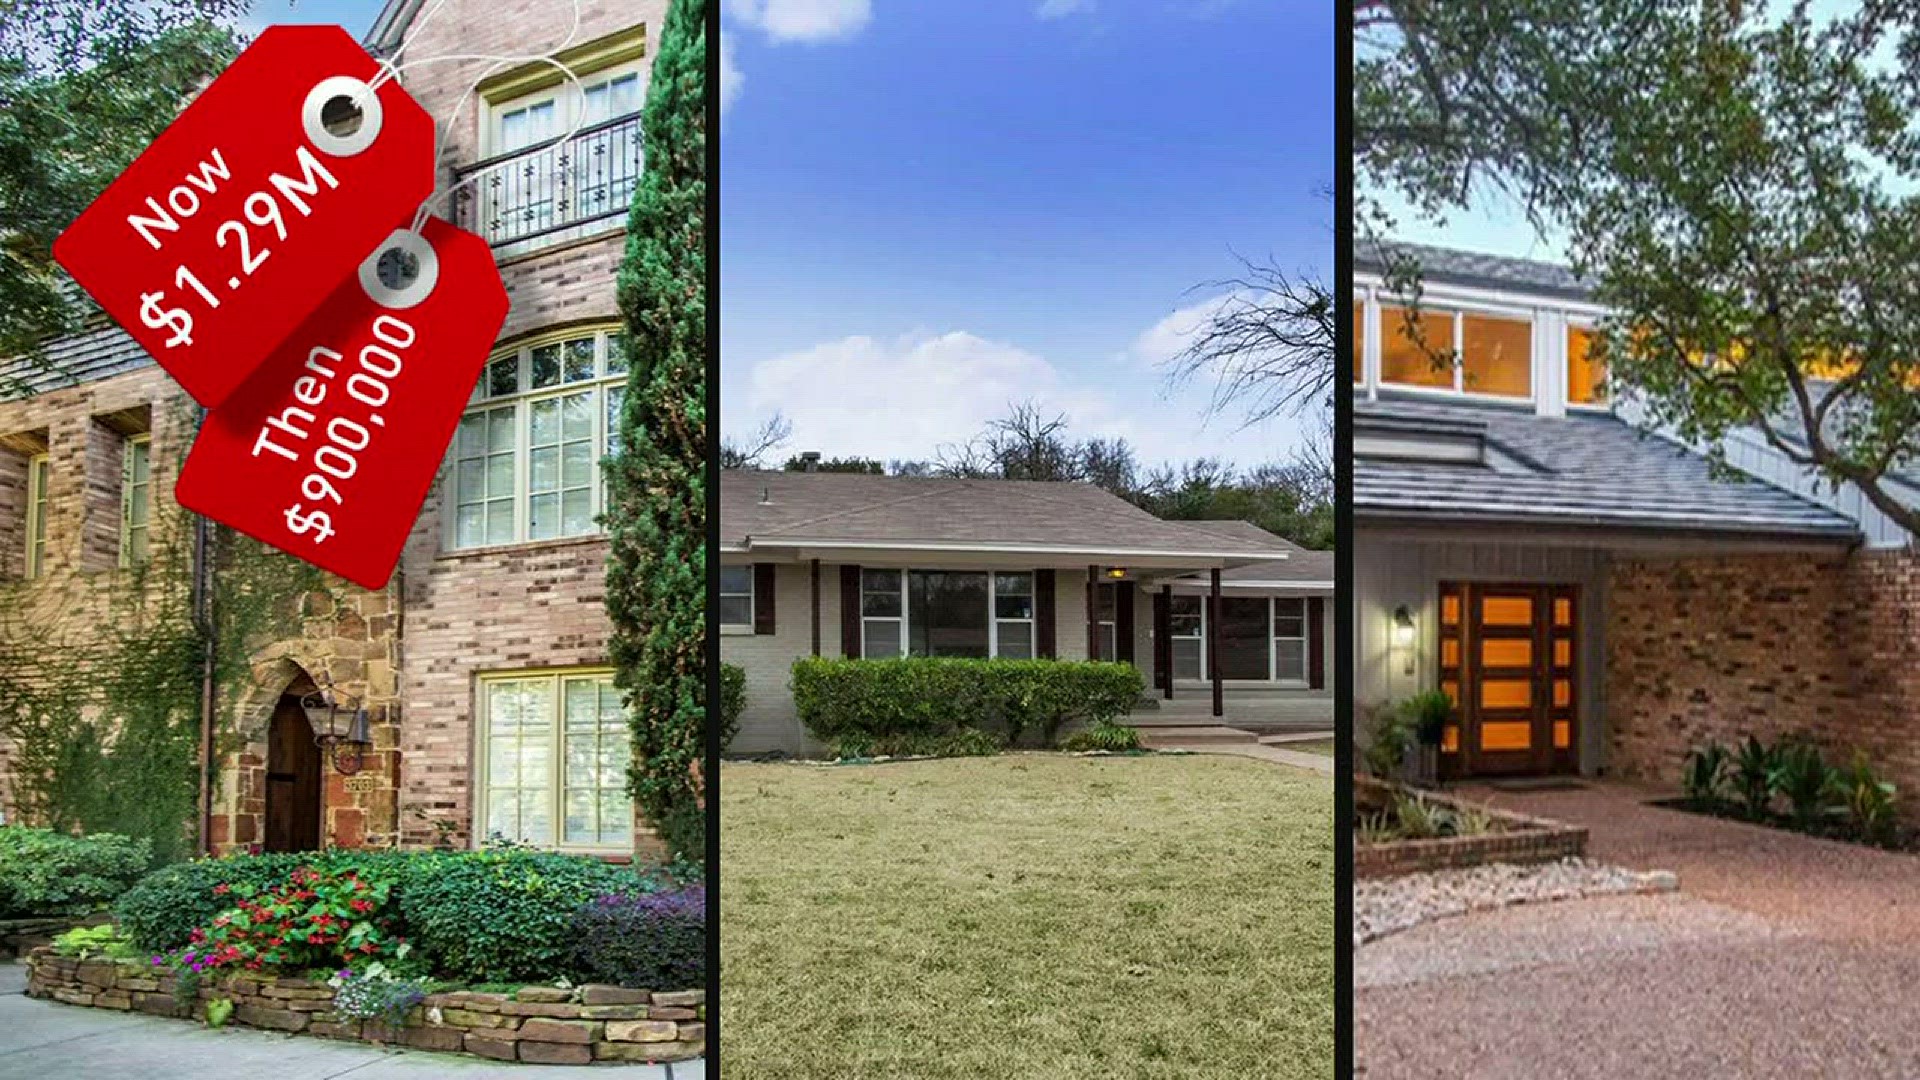 How far does your dollar stretch in homes in North Texas?